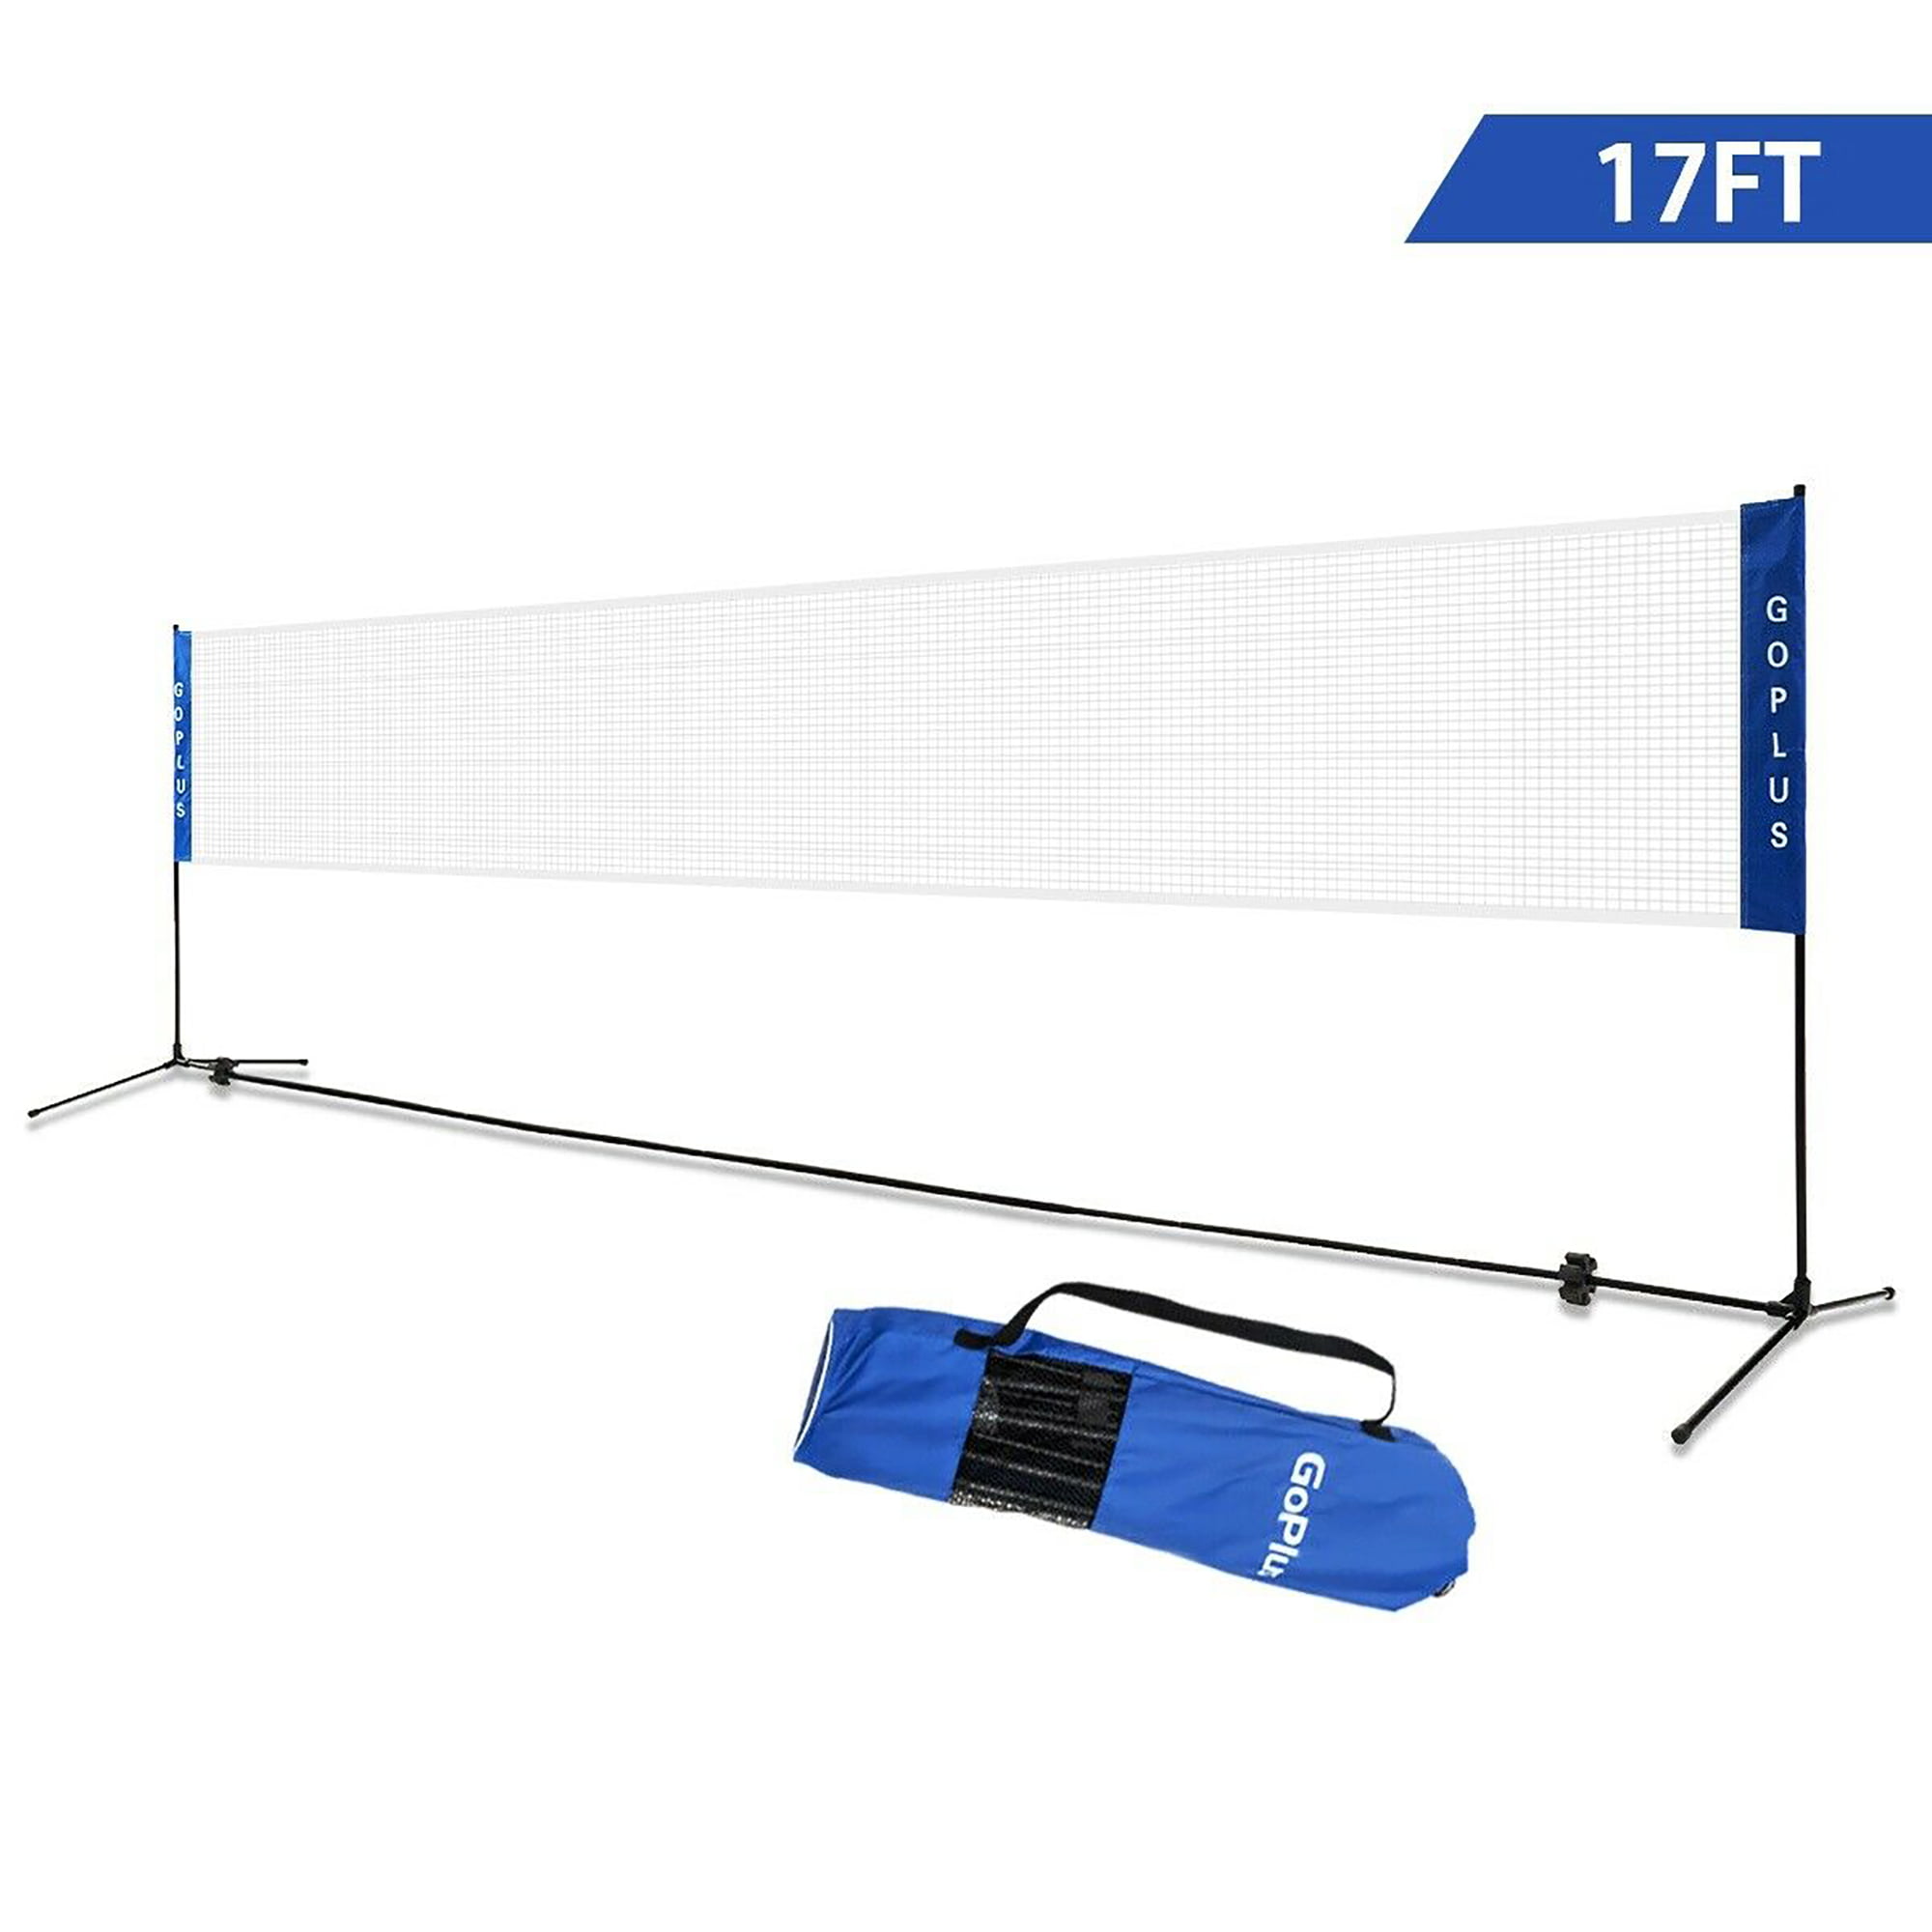 JINGZ Badminton Net Set,Easy Setup Volleyball Tennis Net Rack with Carry Bag for Home,Backyard Beach,Court,No Poles or Stakes Required